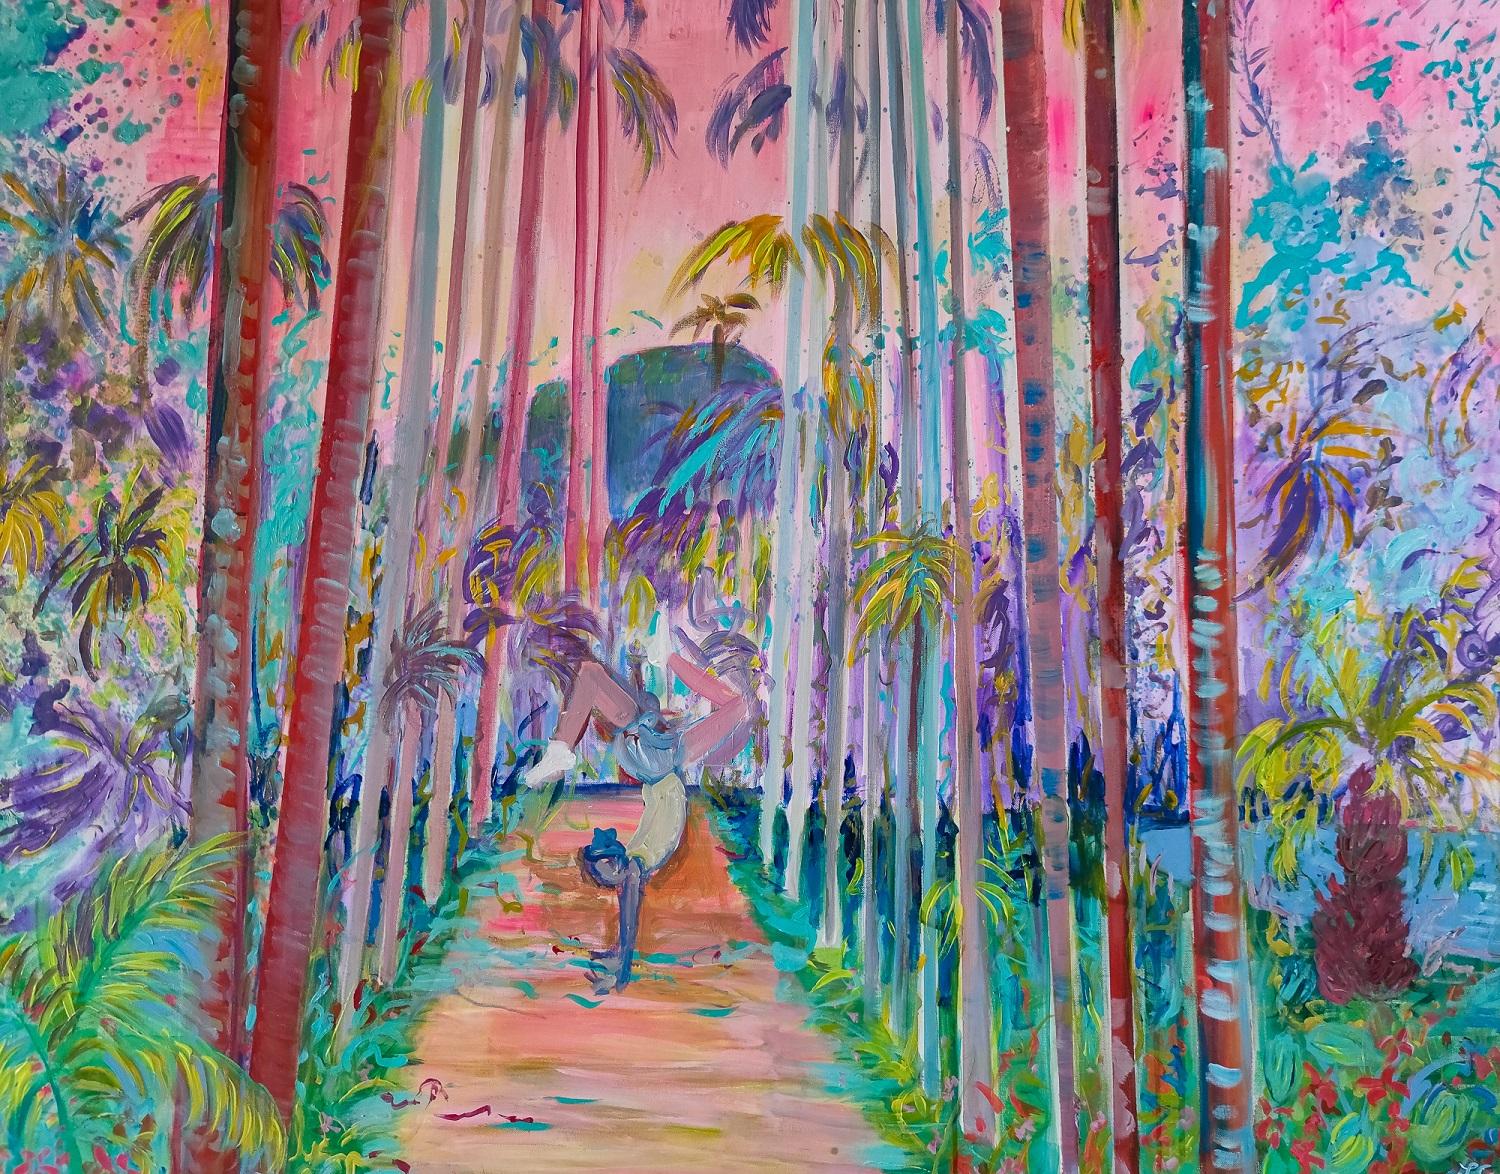  Linda Clerget Landscape Painting - Tropical body